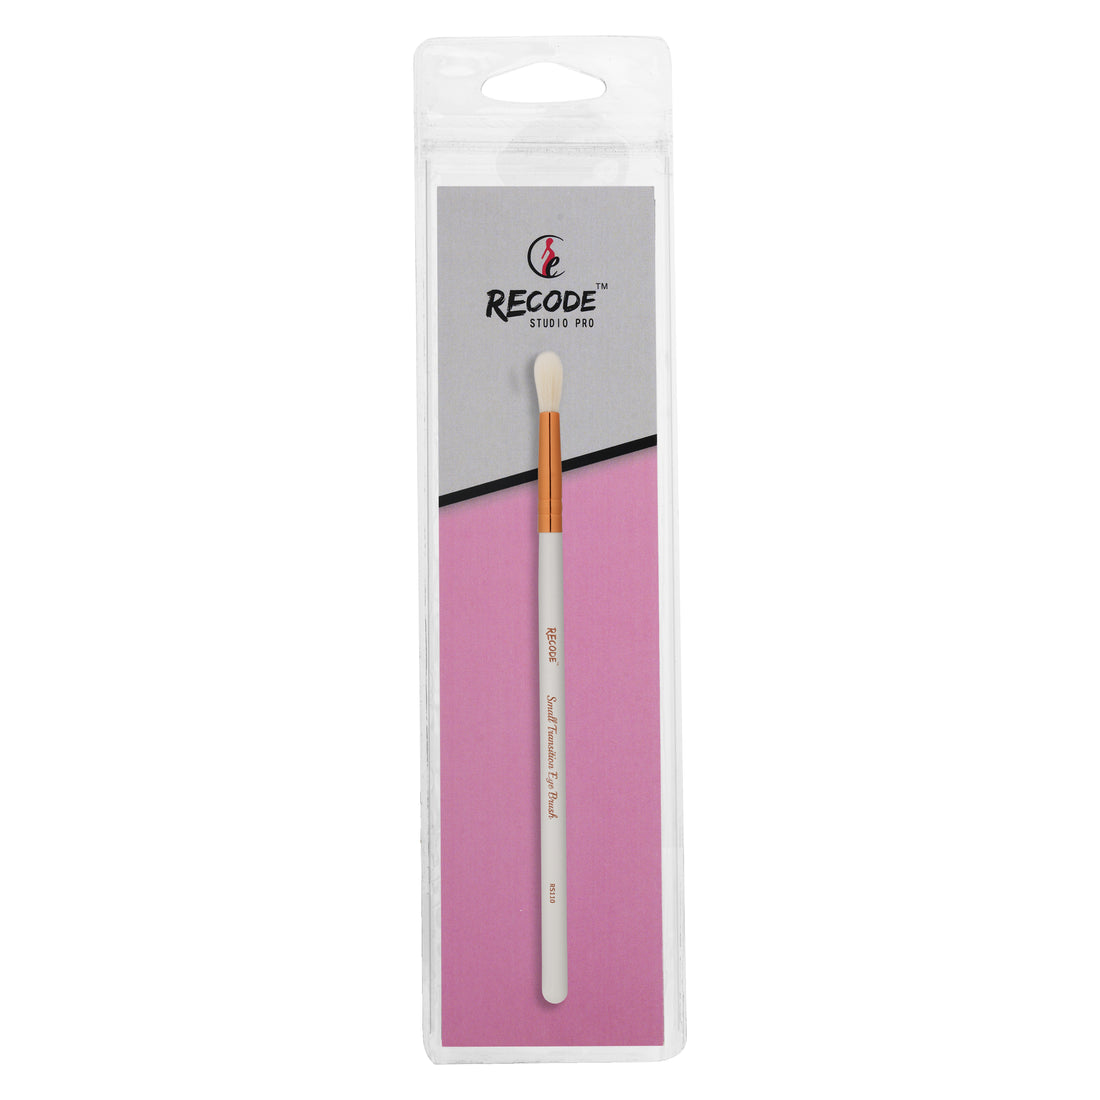 SMALL TRANSITION EYE BRUSH - RECODE RS 110